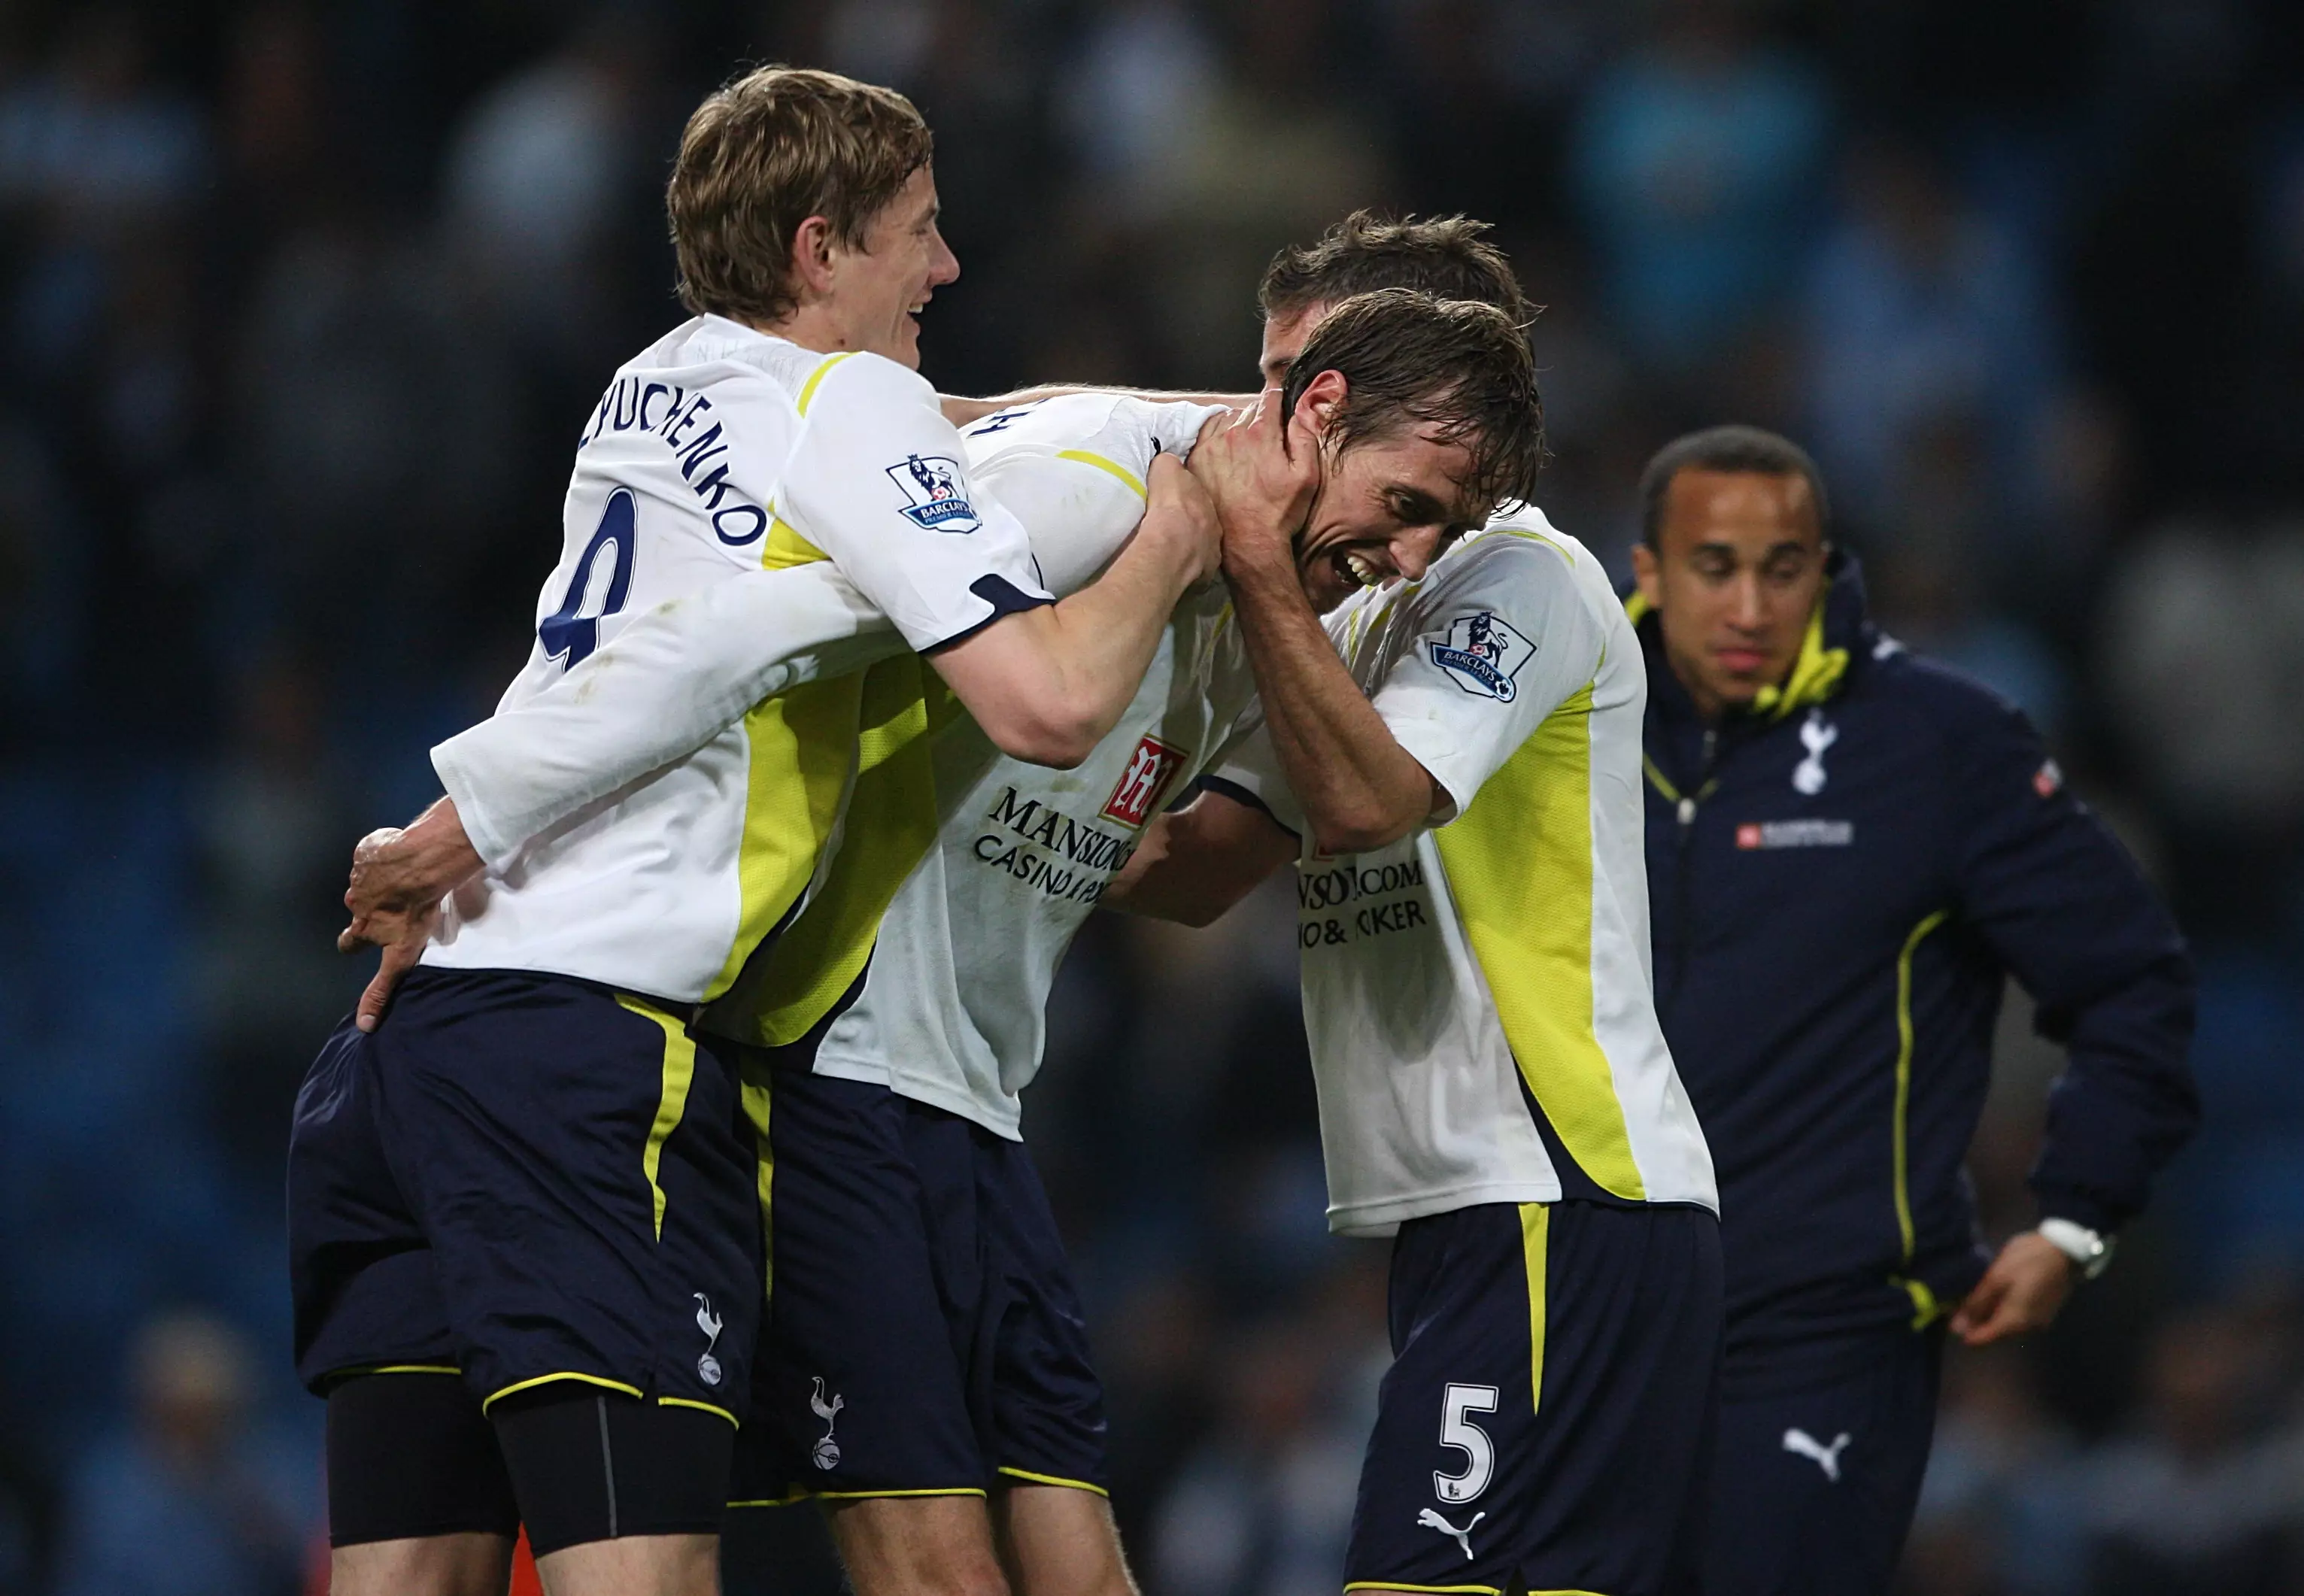 Crouch mobbed by Spurs teammates after scoring against City. Image: PA Images